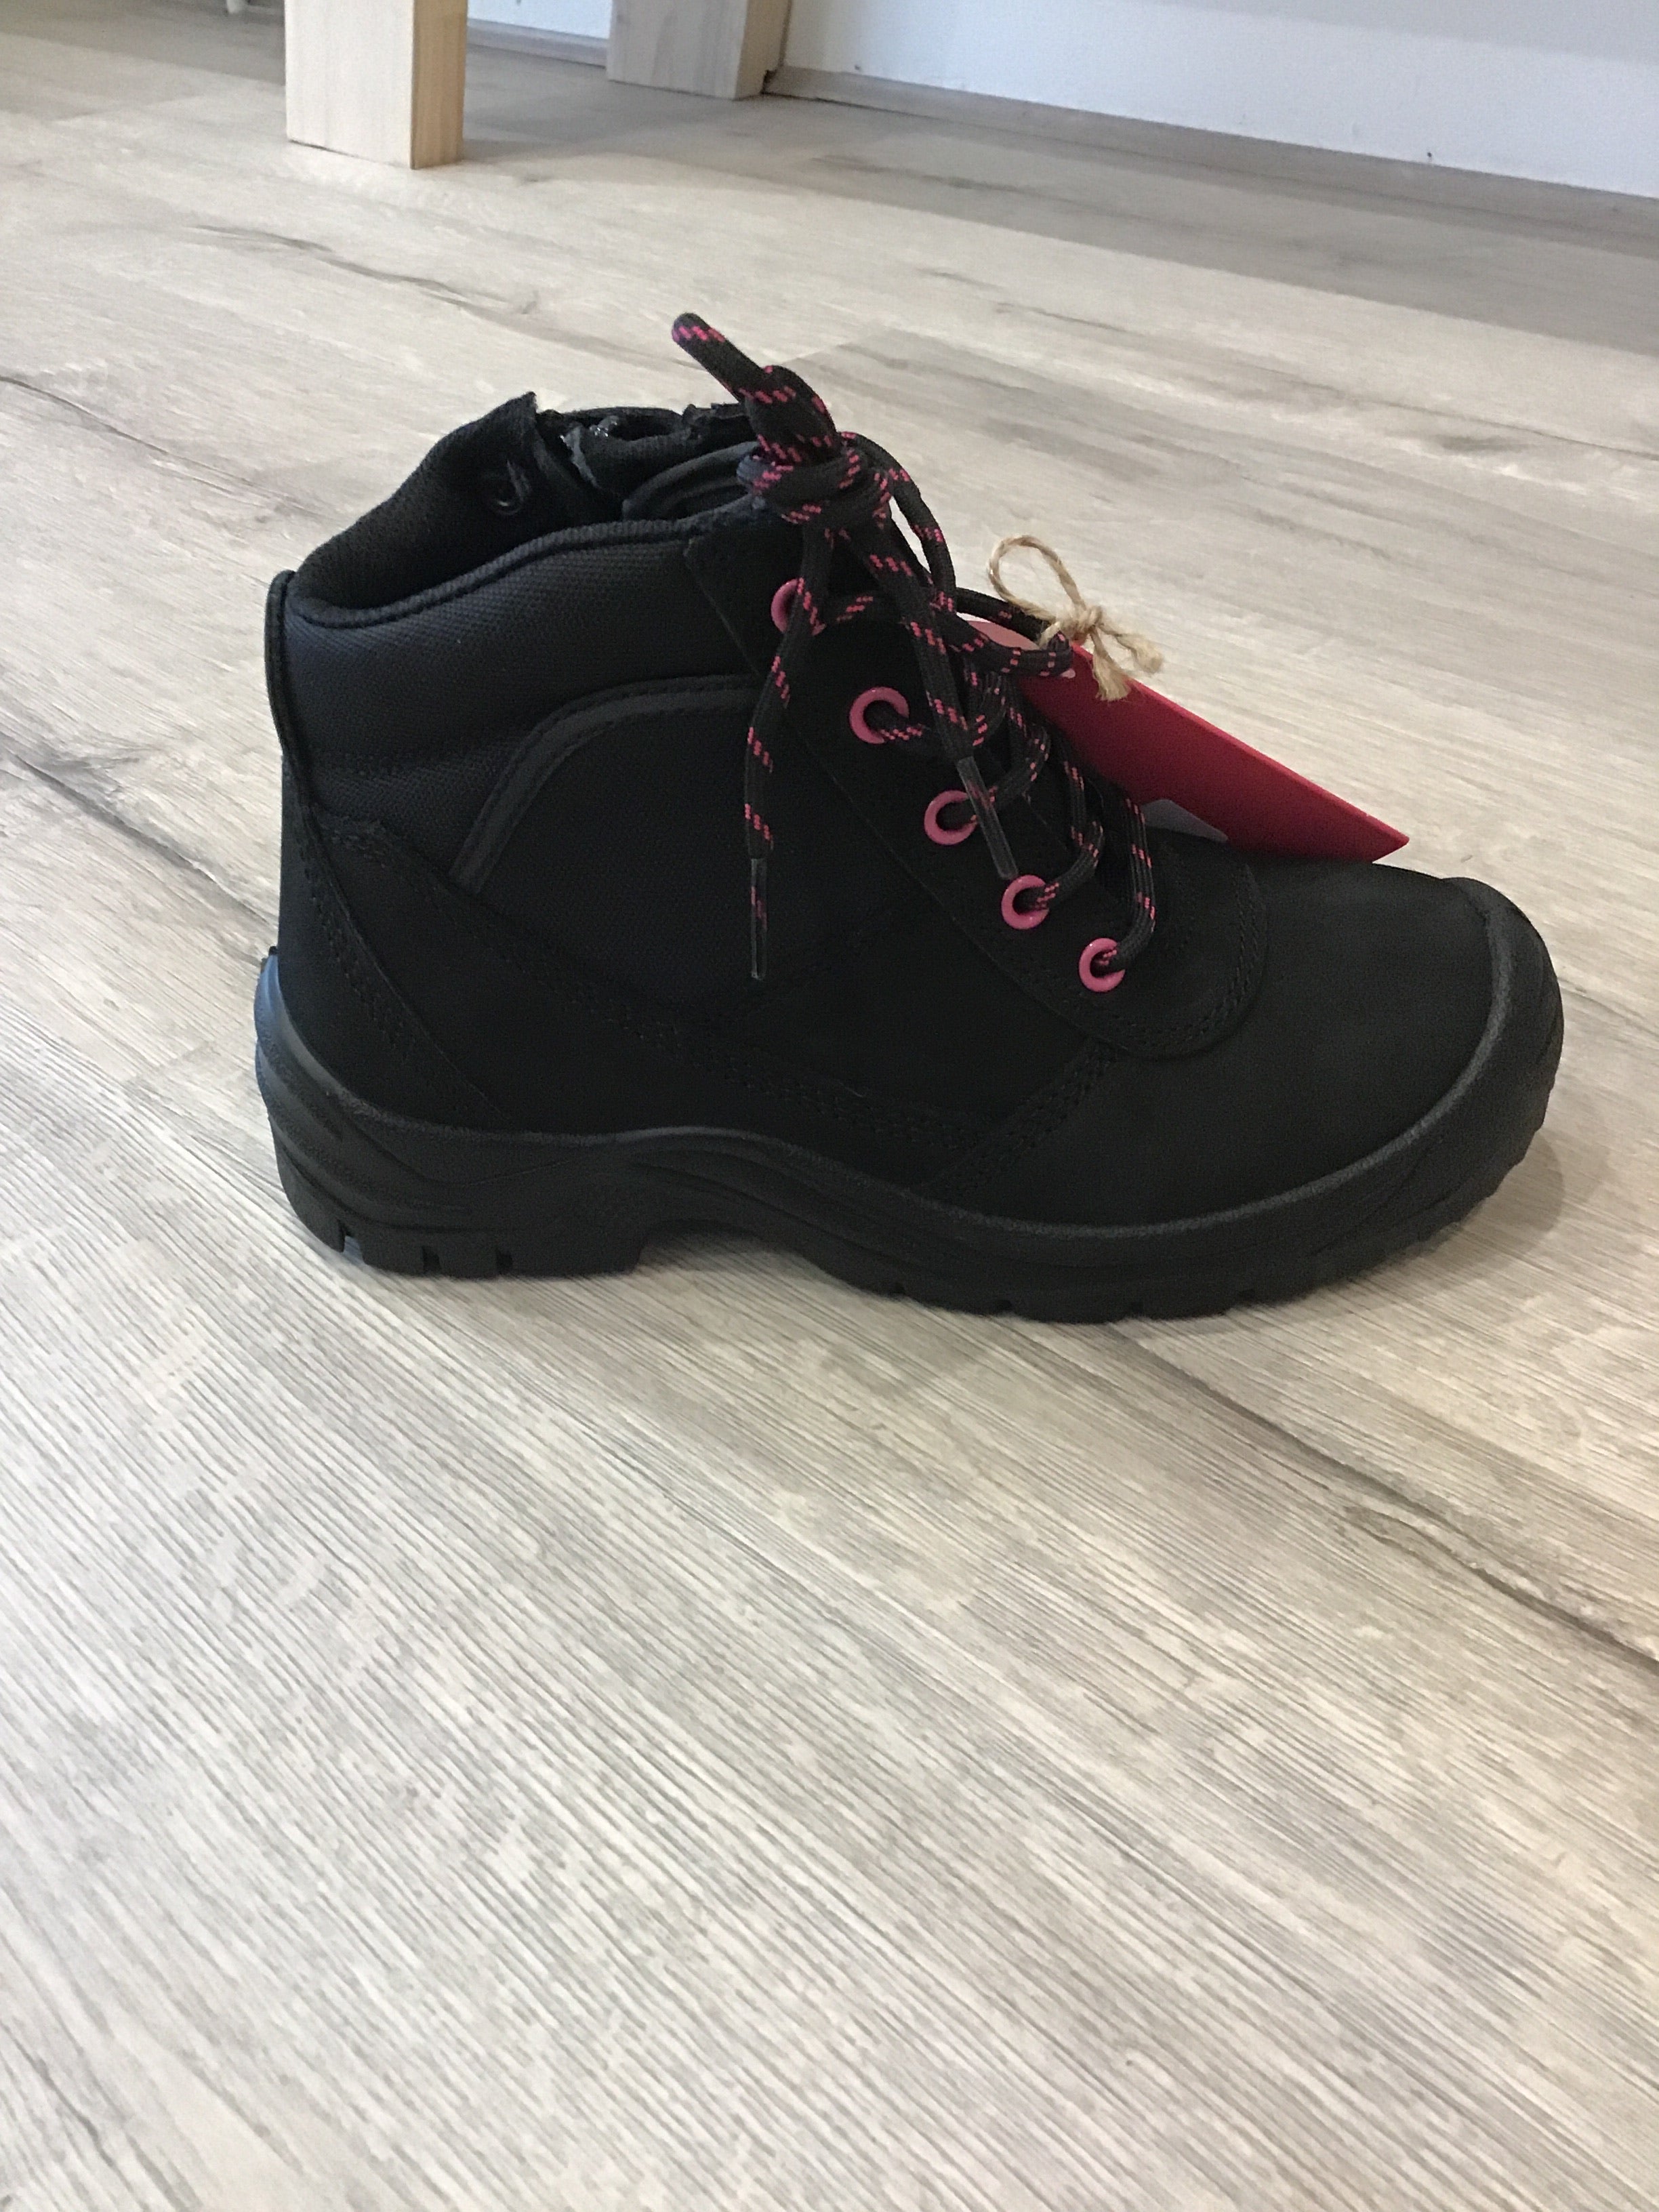 Best Ever Boots - Buster Black with Pink eyelets - Steel toe